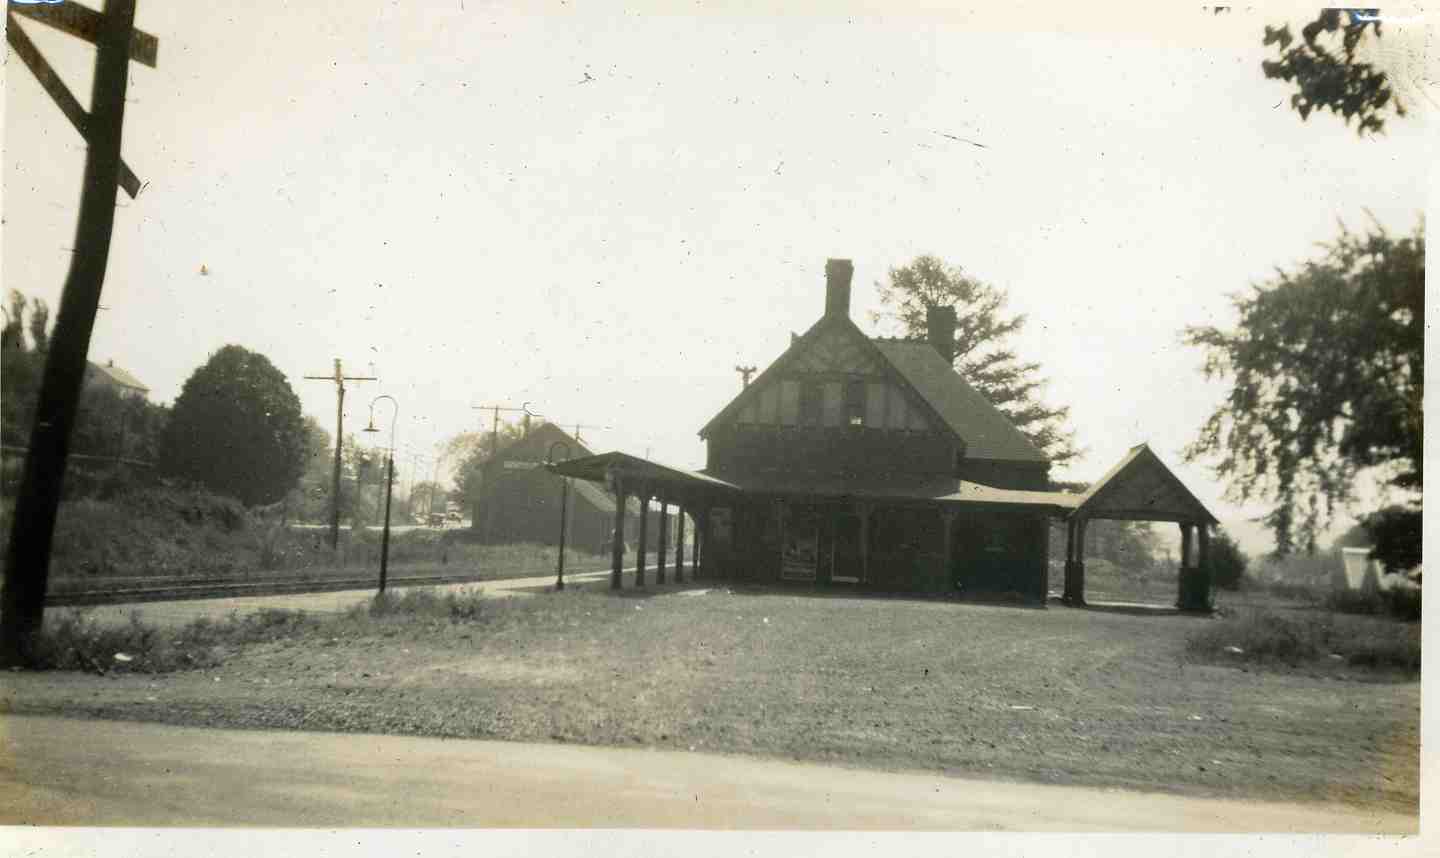 Southborough Station in the 1930